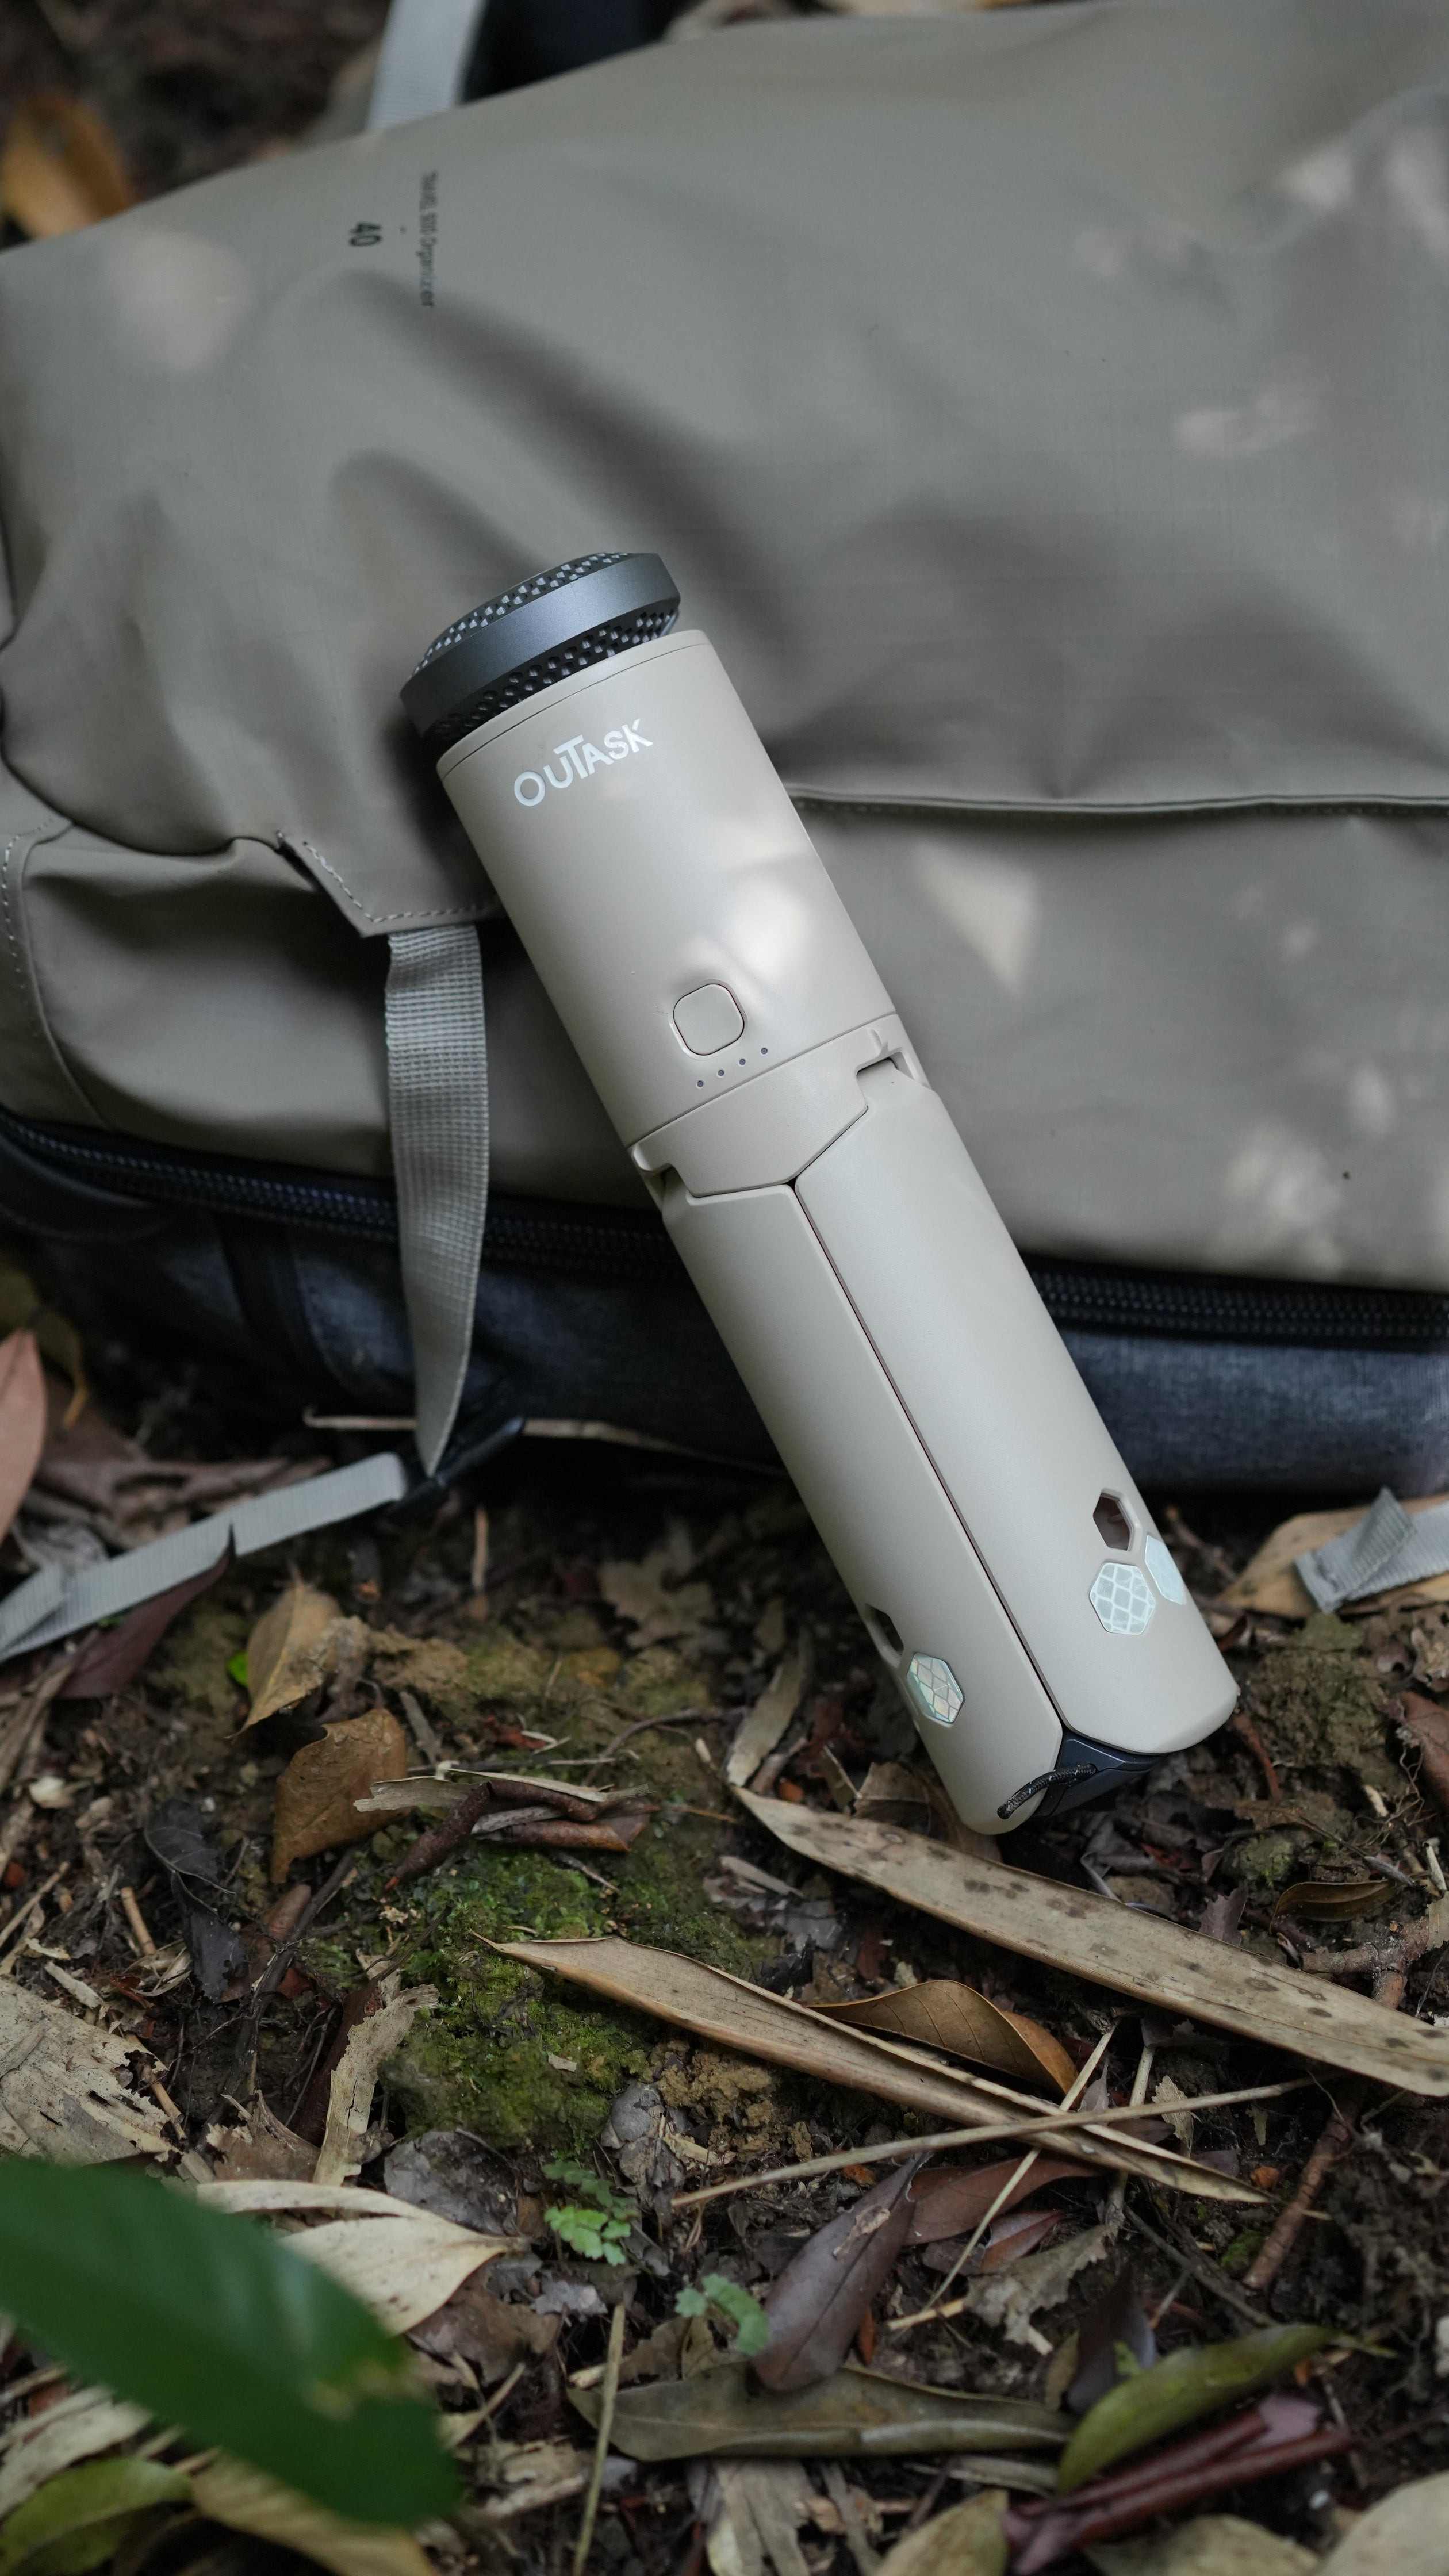 ouTask Ultra Portable Camp Light with Telescopic Pole and Magnetic Tripod